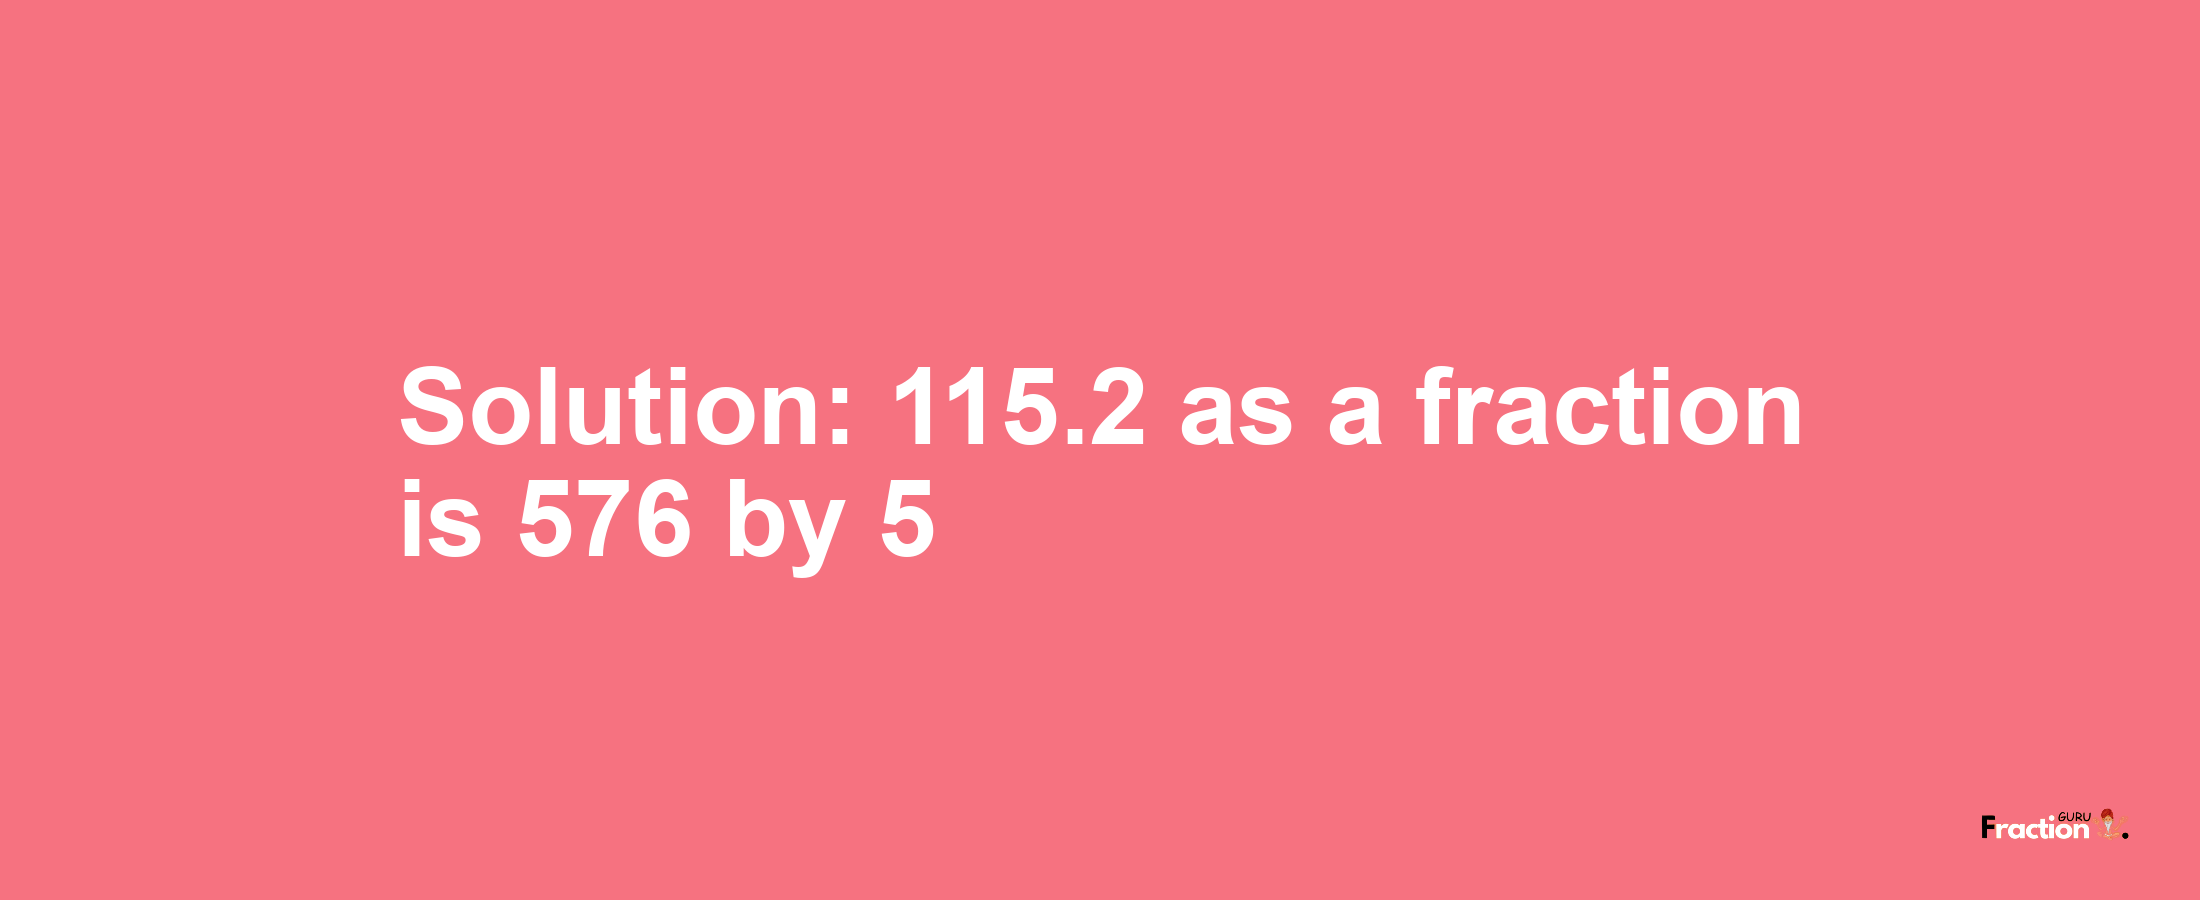 Solution:115.2 as a fraction is 576/5